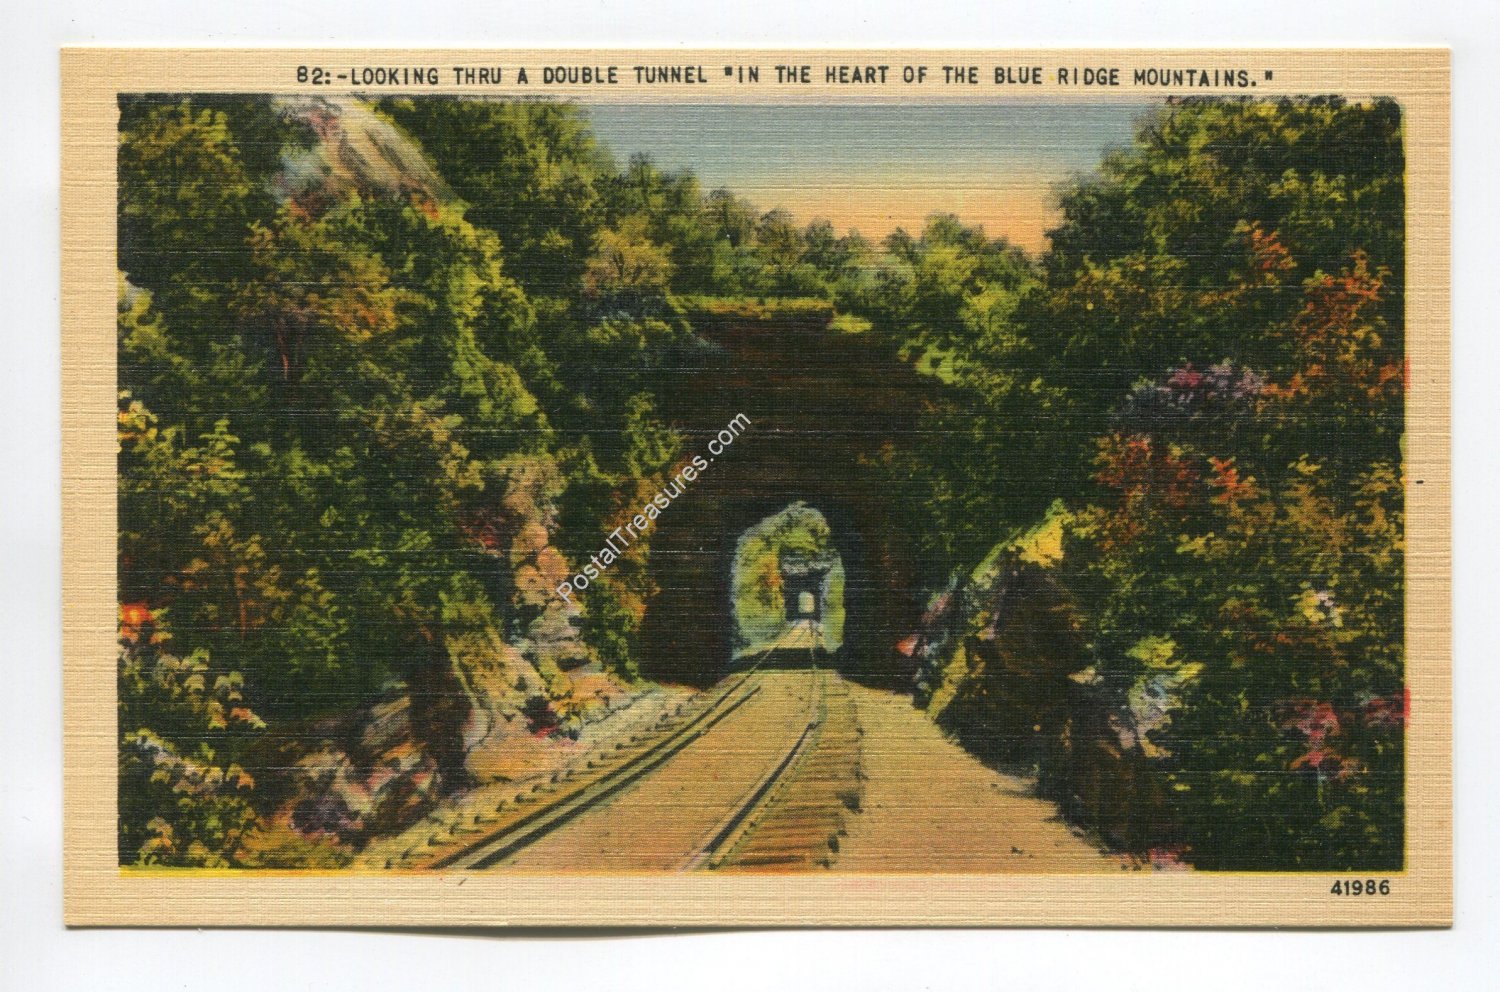 Looking thru a Double Tunnel in the Heart of the Blue Ridge Mountains Postcard